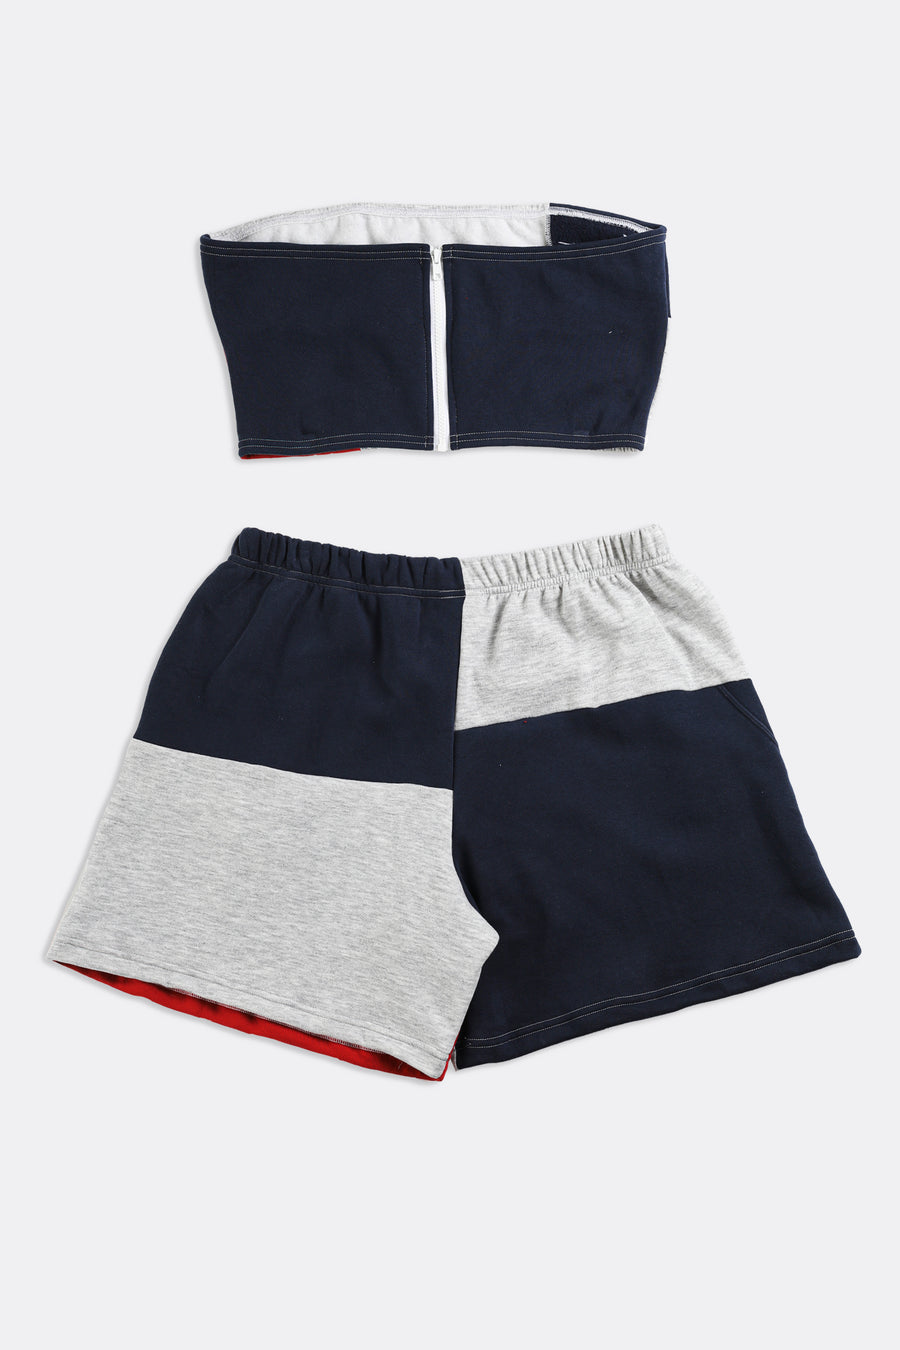 This week's batch of reworked Nike sweatshorts 🧚available